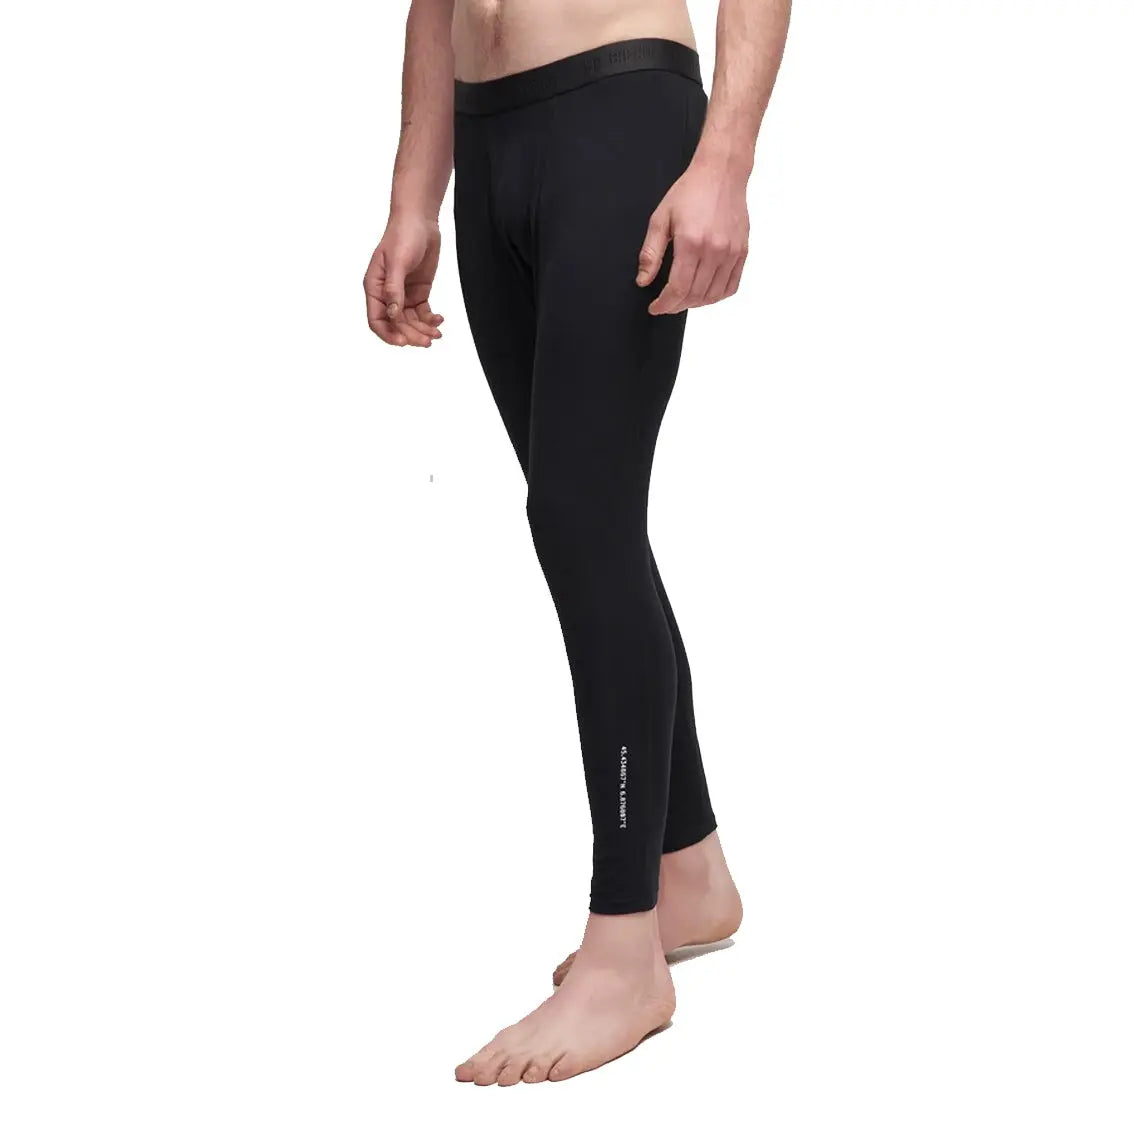 Mens Le Bent 200 Weight Thermal Bottom - Black